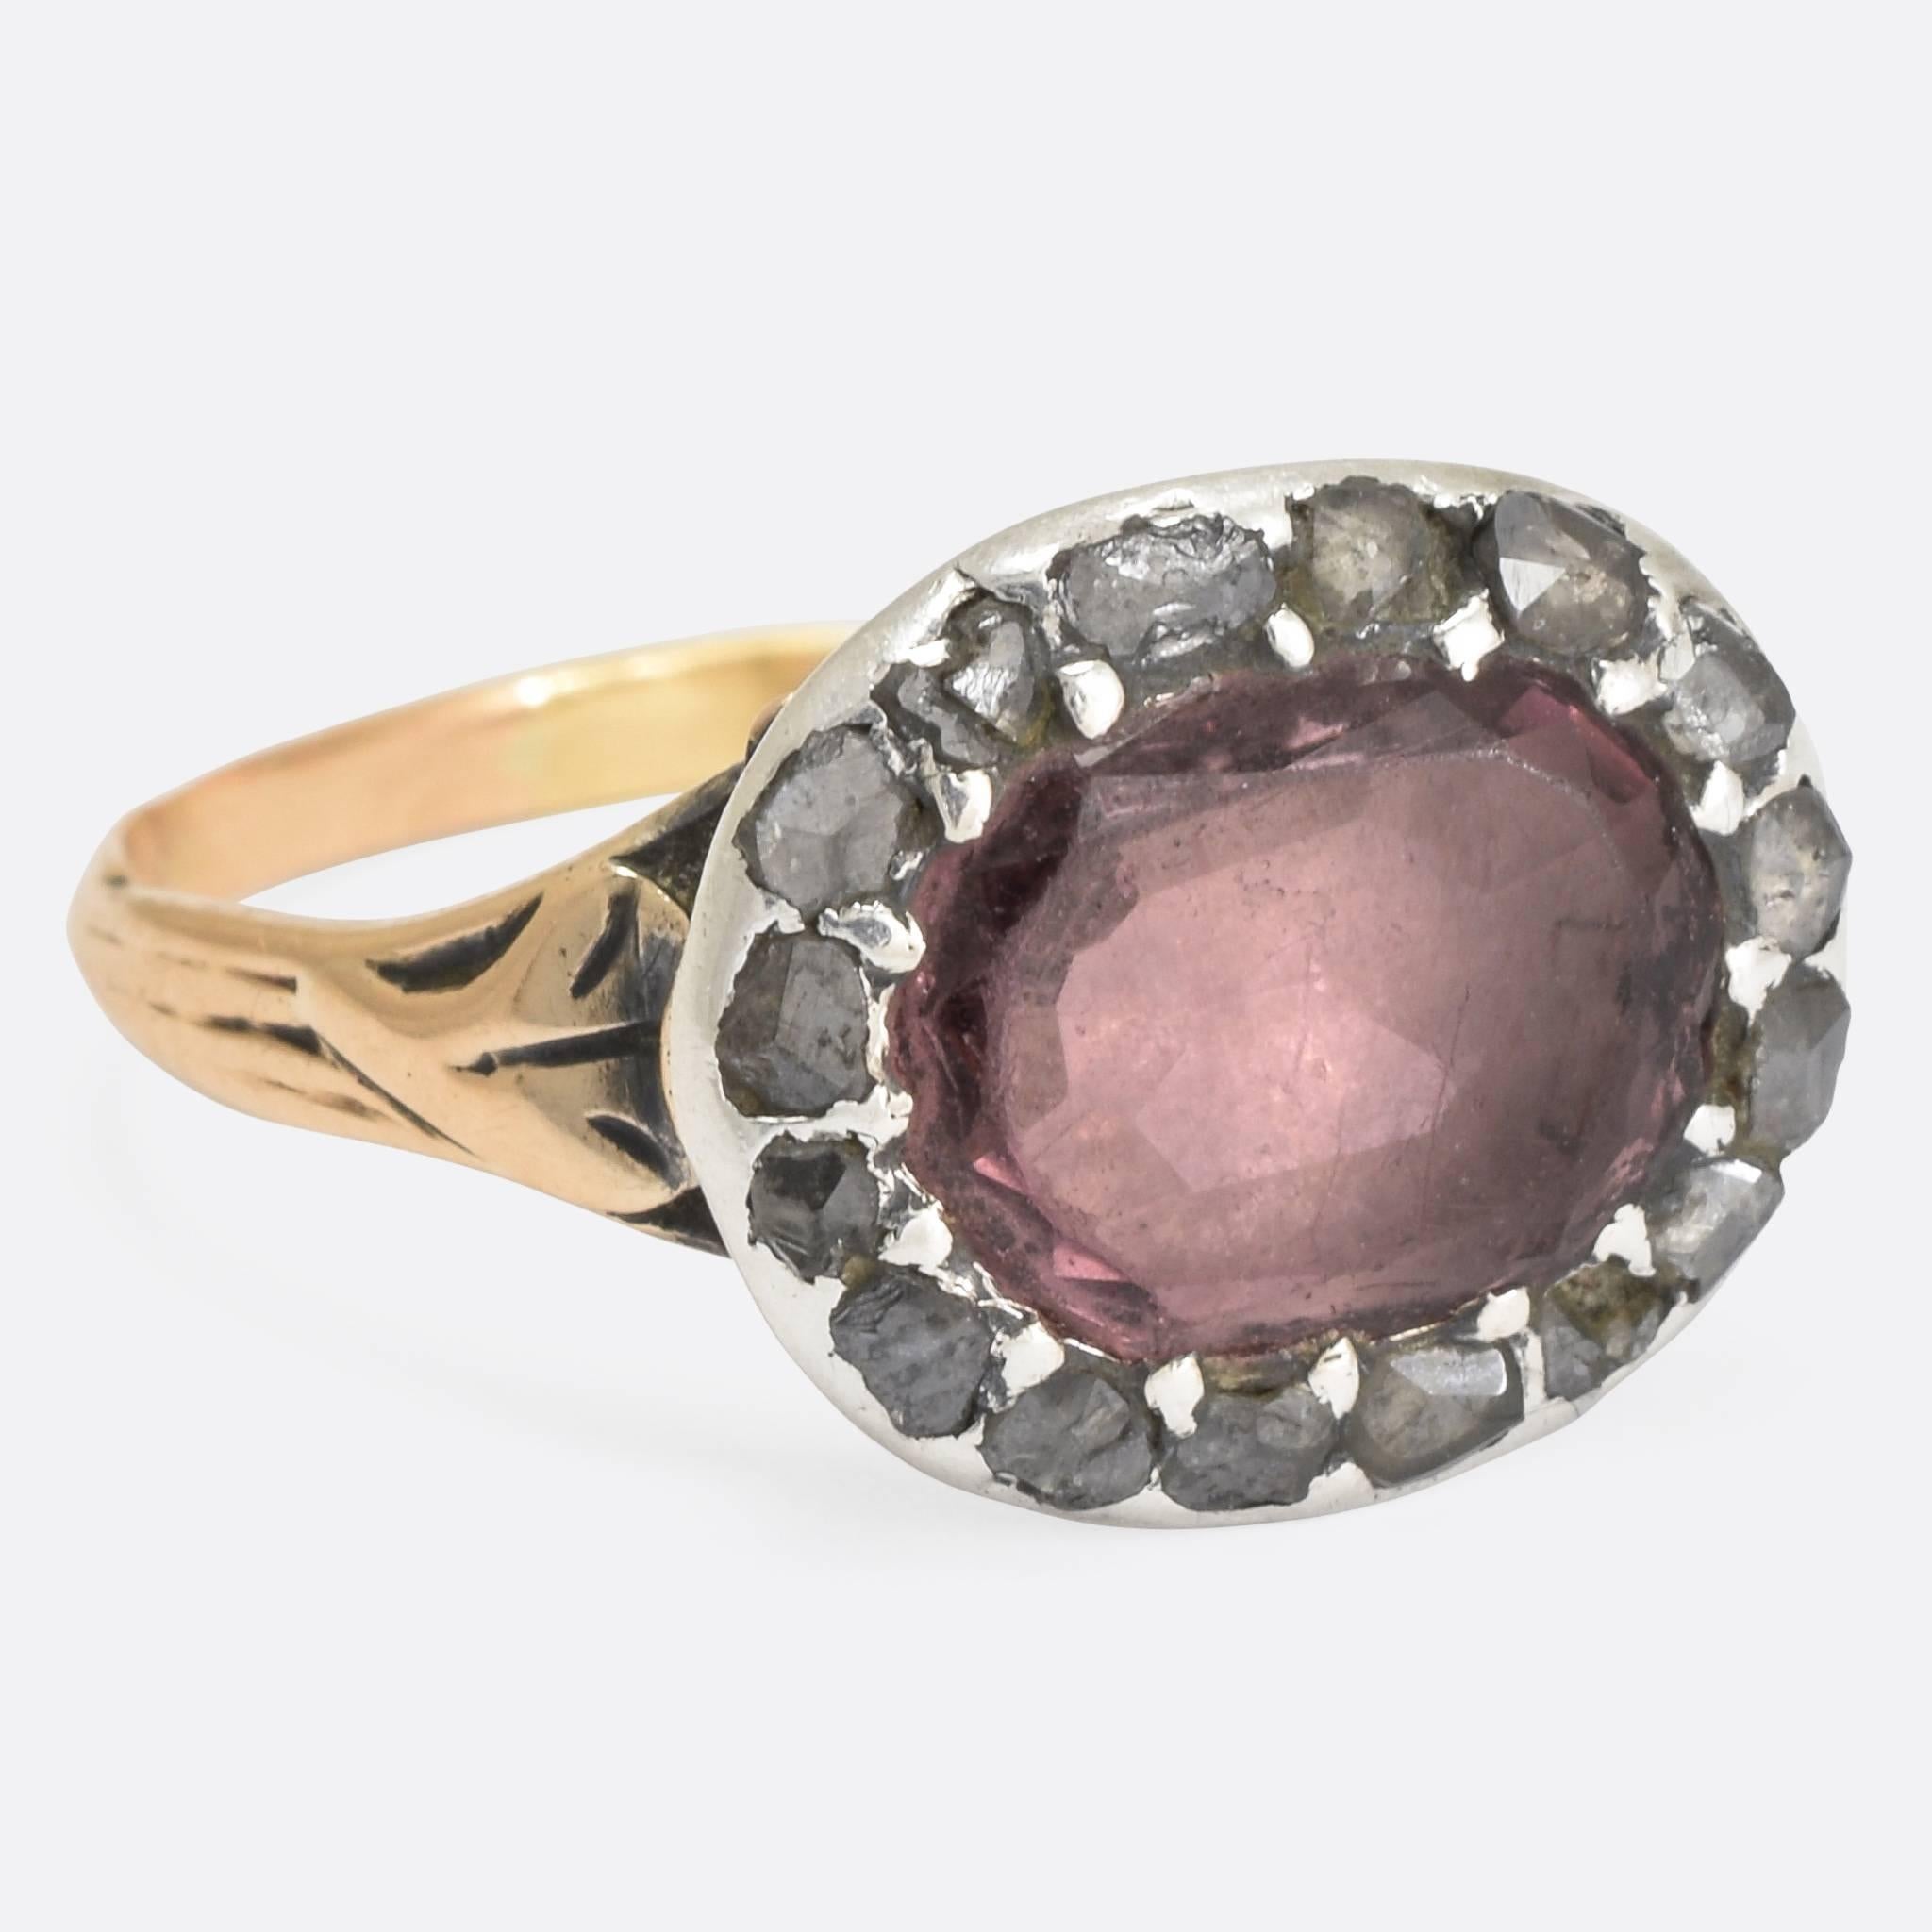 A fine quality Georgian cluster ring, the central faceted amethyst surrounded by a halo of rose cut diamonds all in silver settings. With lovely flowing foliate detail to the trifurcated shoulders. Ring size: 8.